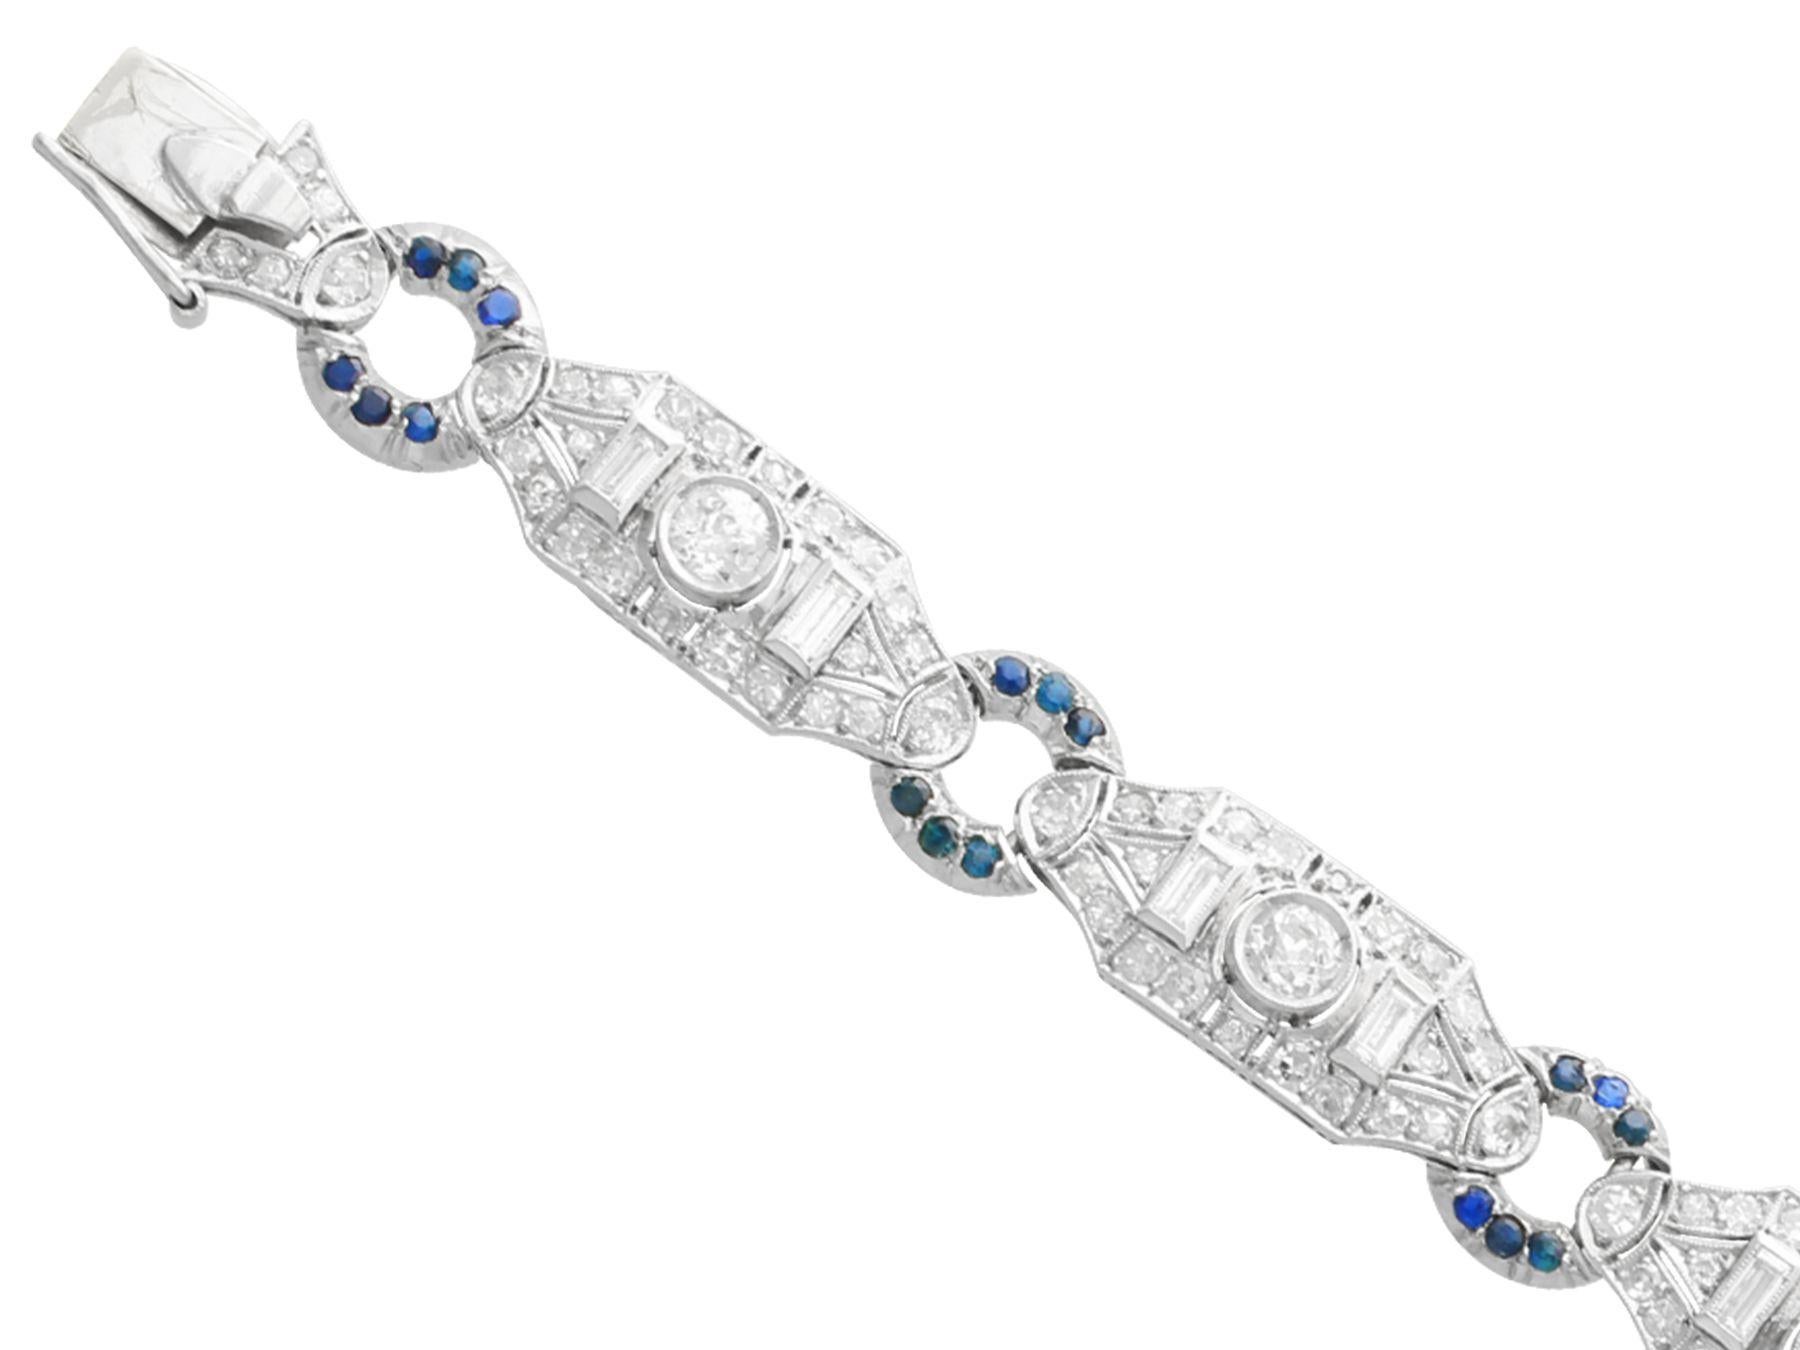 Art Deco 6.21 Carat Diamond and Sapphire Bracelet in Platinum In Excellent Condition For Sale In Jesmond, Newcastle Upon Tyne